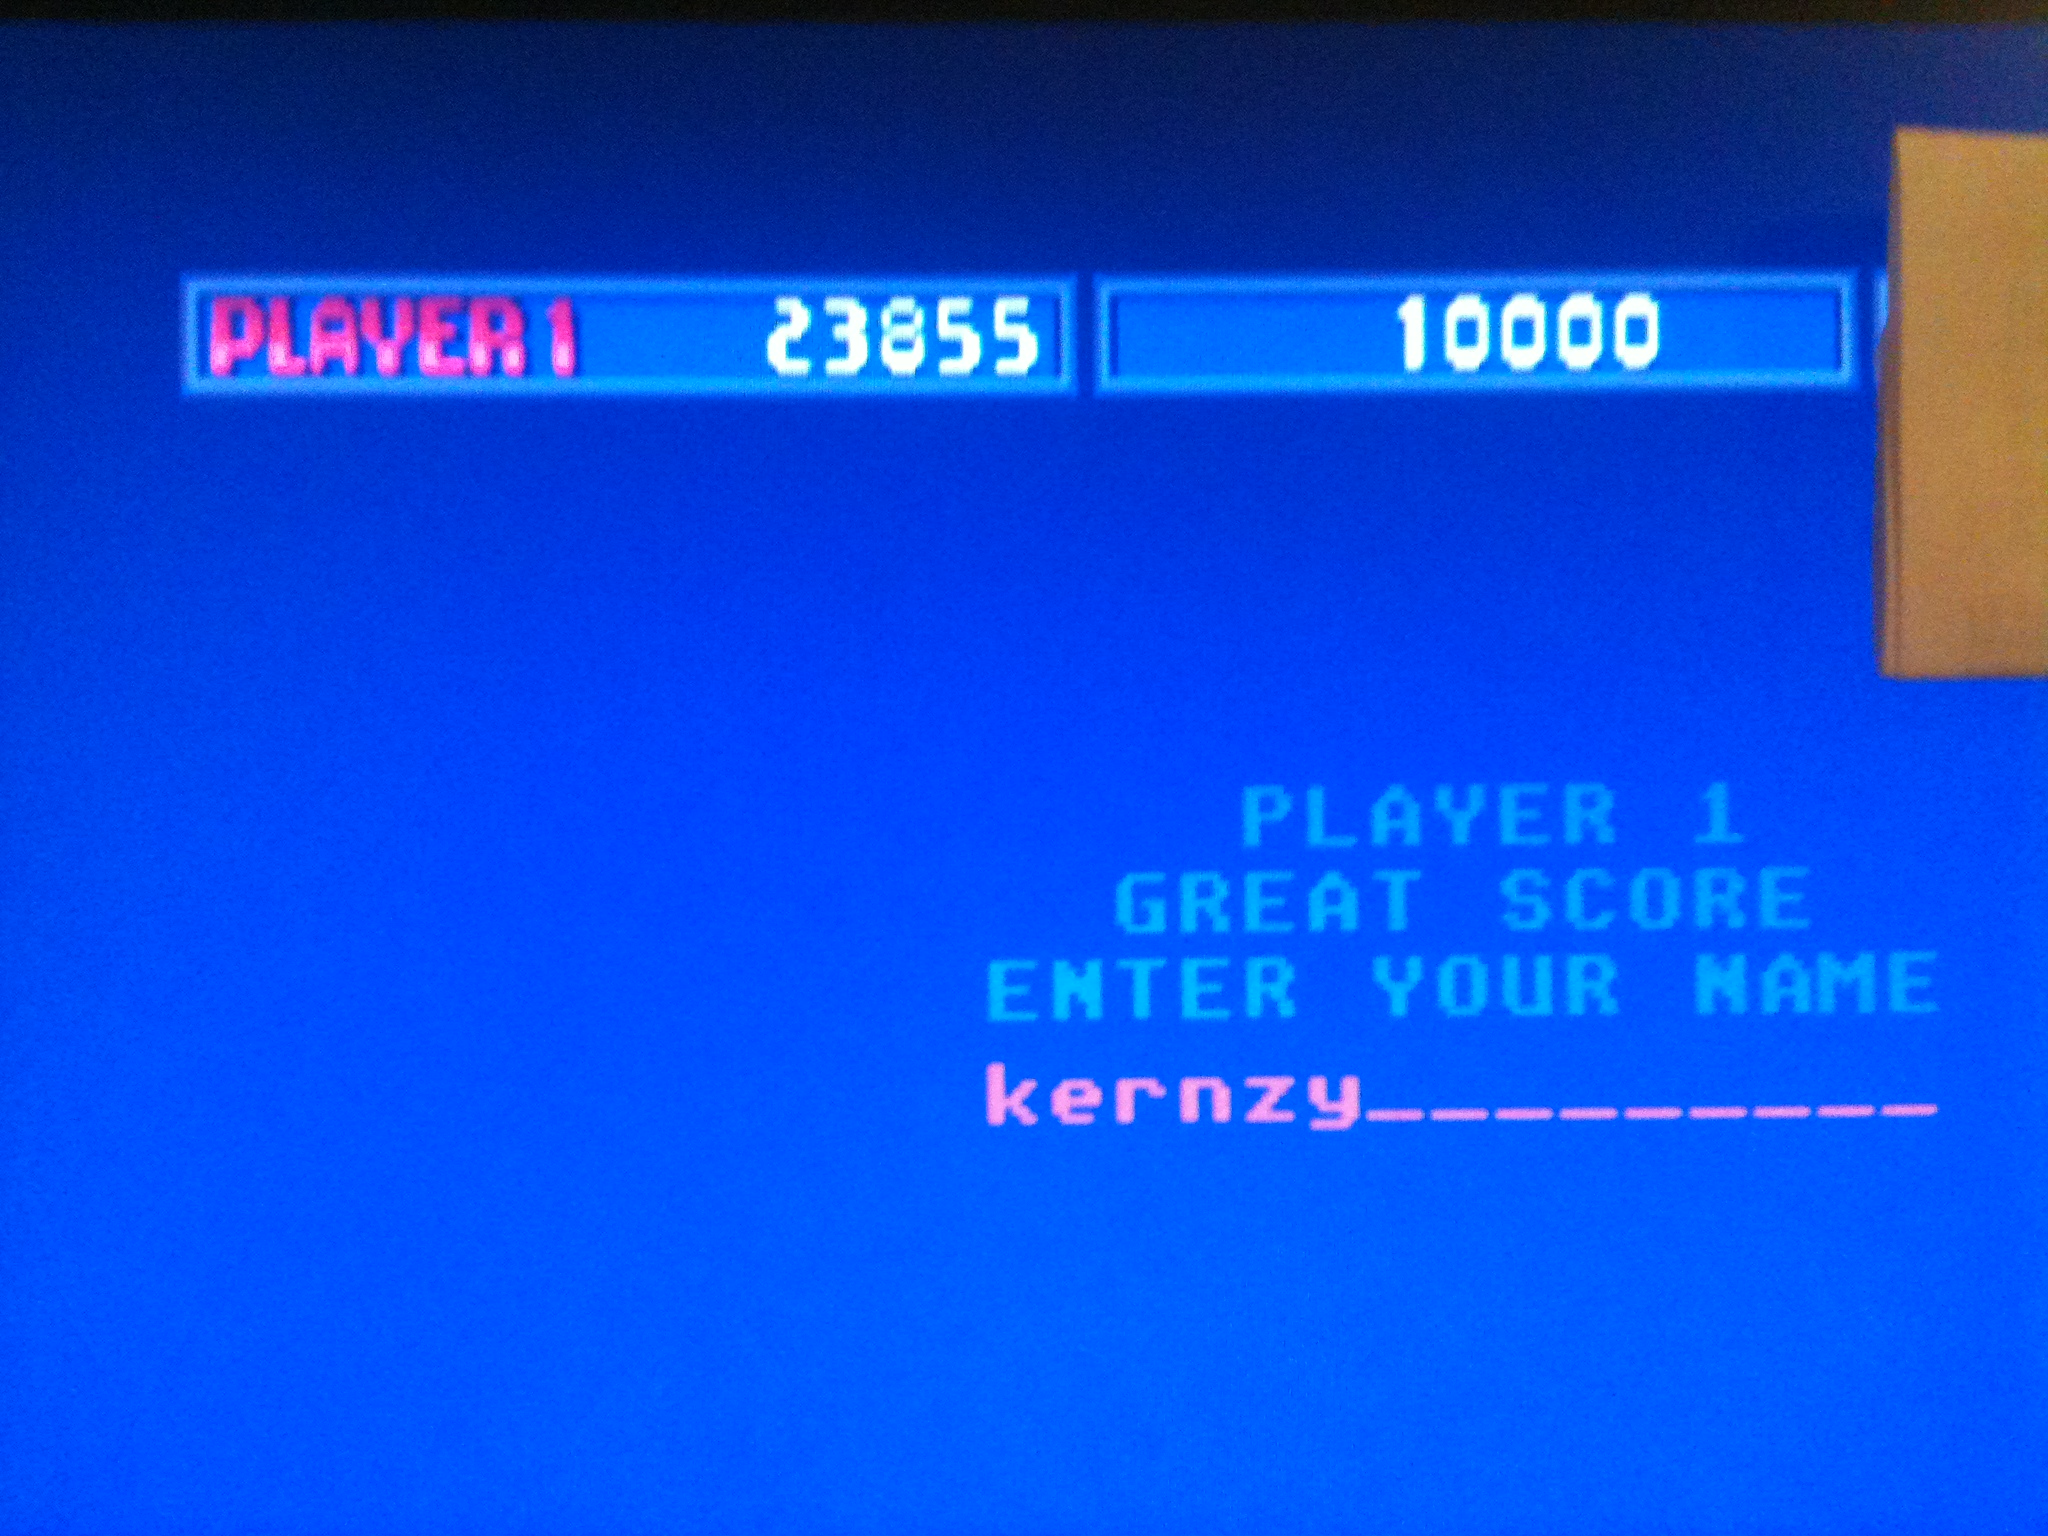 kernzy: Missile Command (Atari ST Emulated) 23,855 points on 2015-02-05 16:54:21